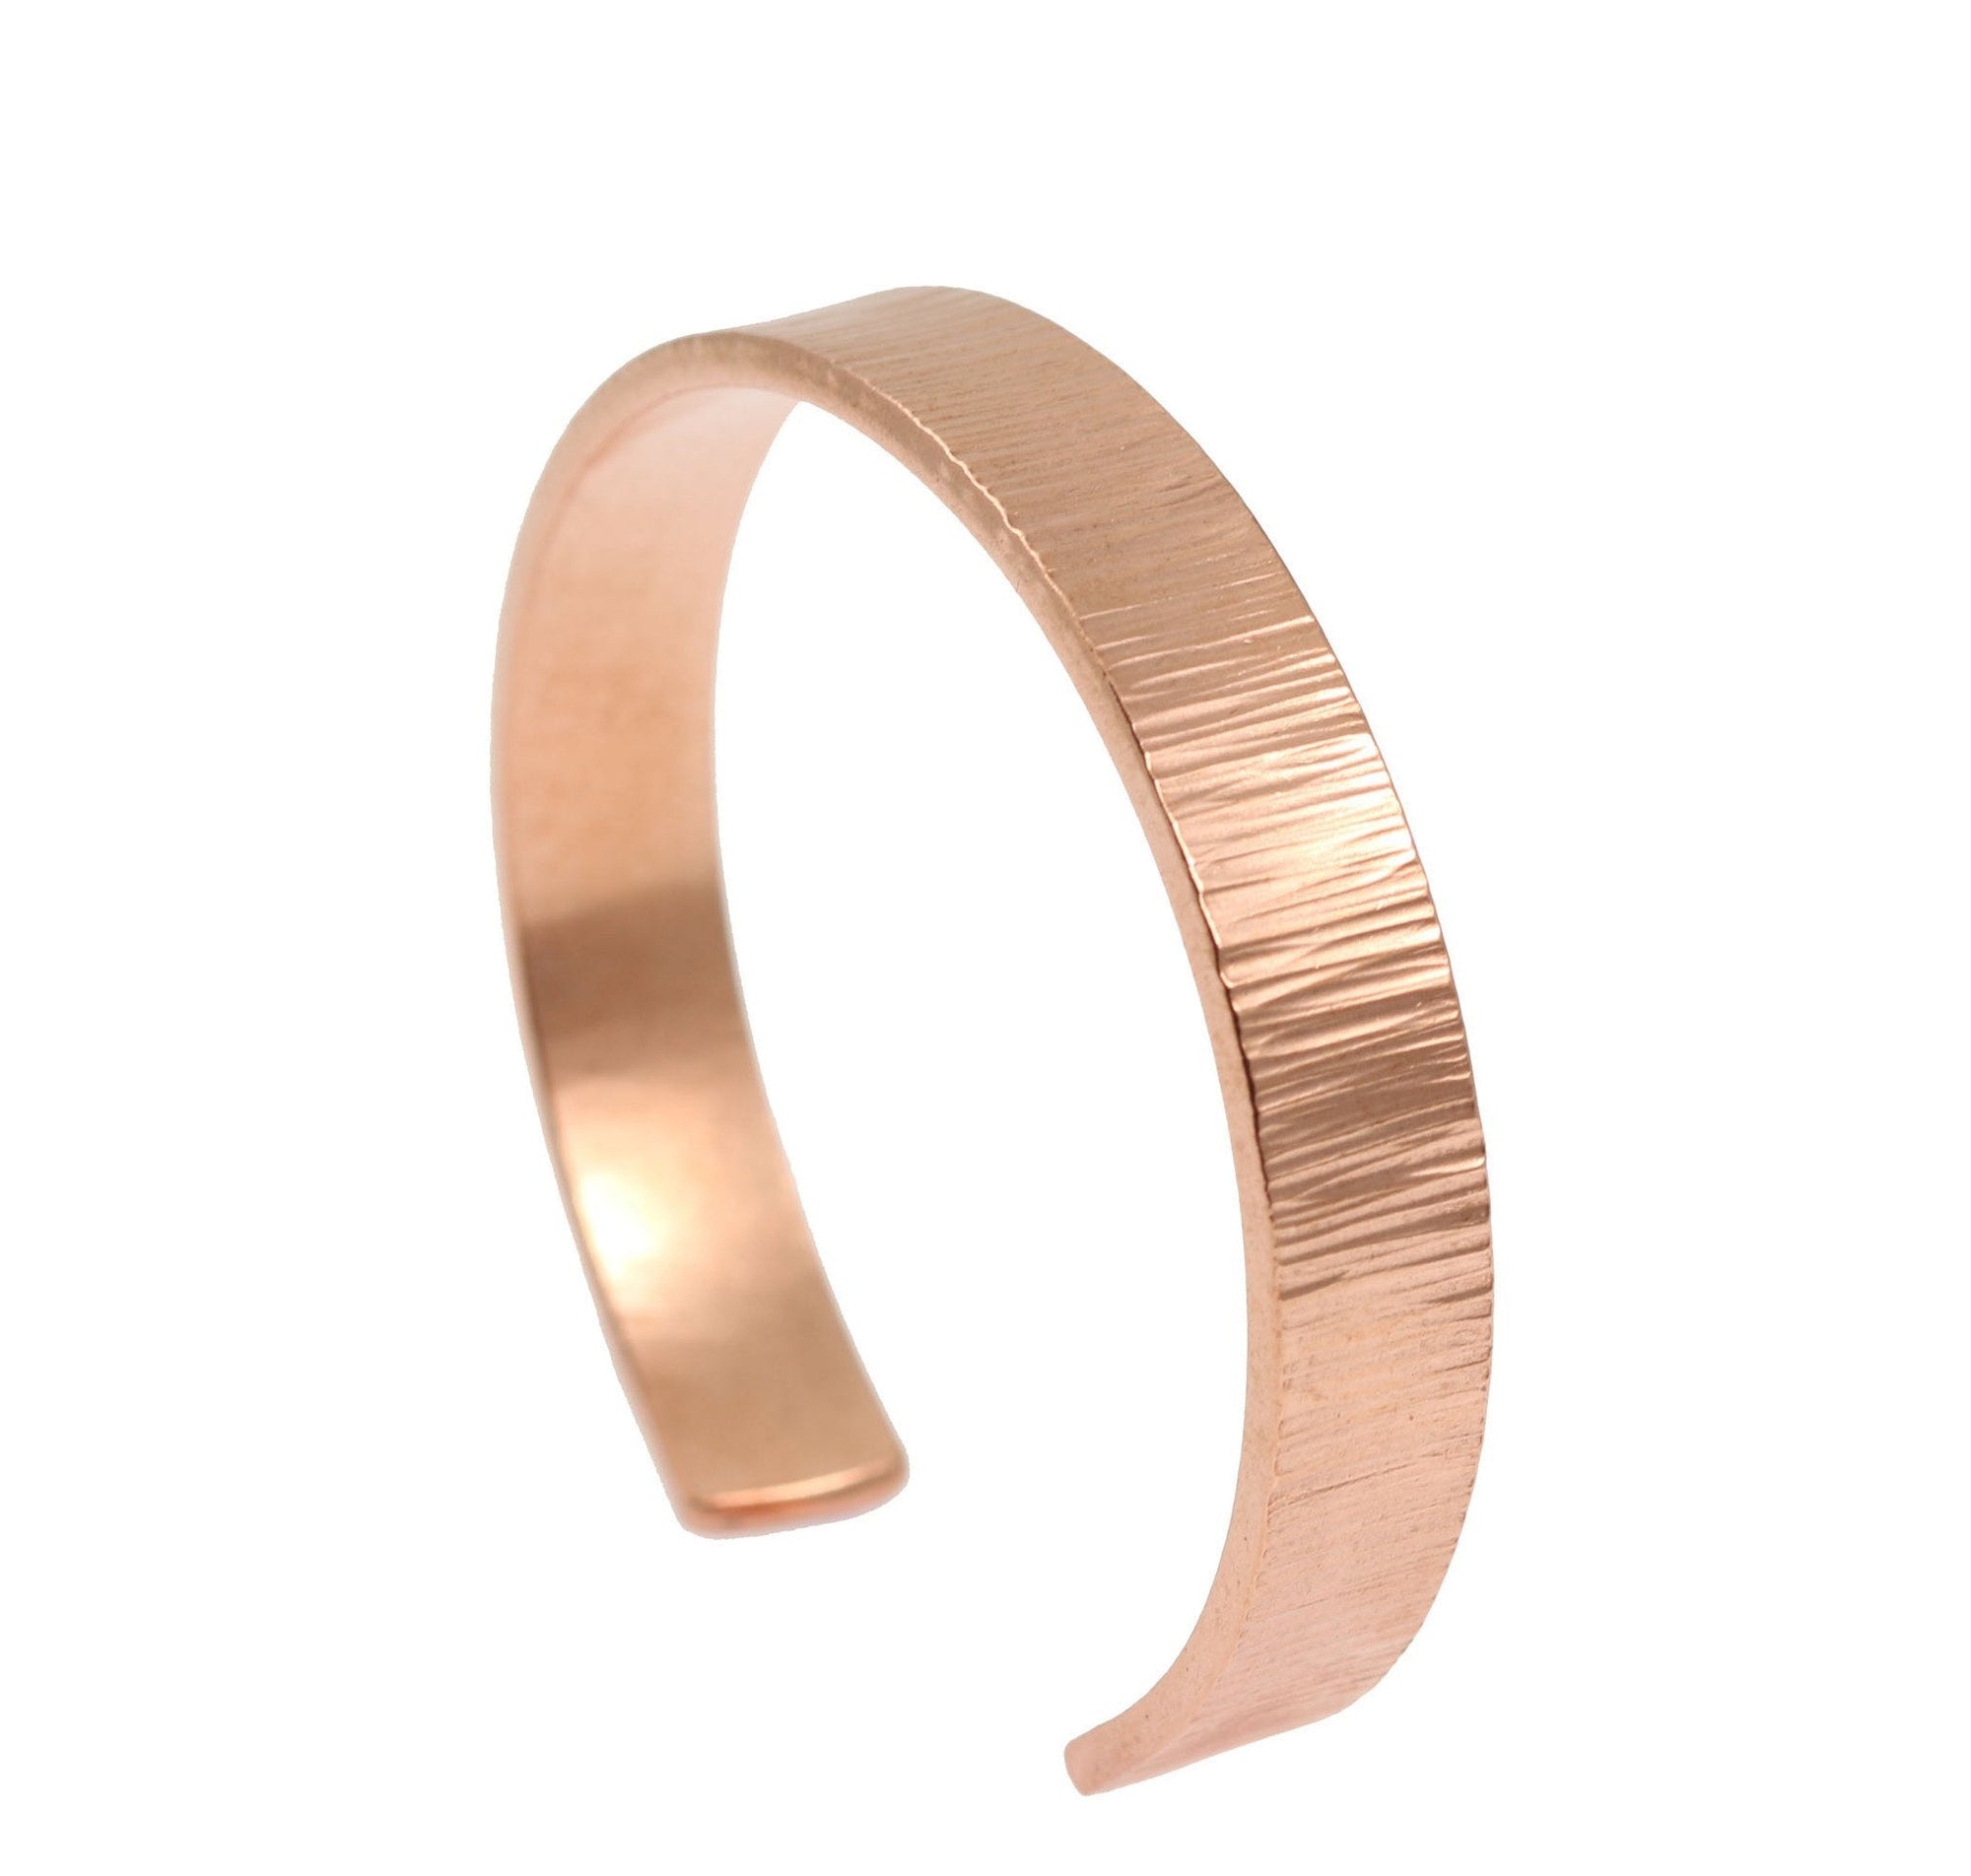 10mm Wide Chased Copper Cuff Bracelet Right Side View